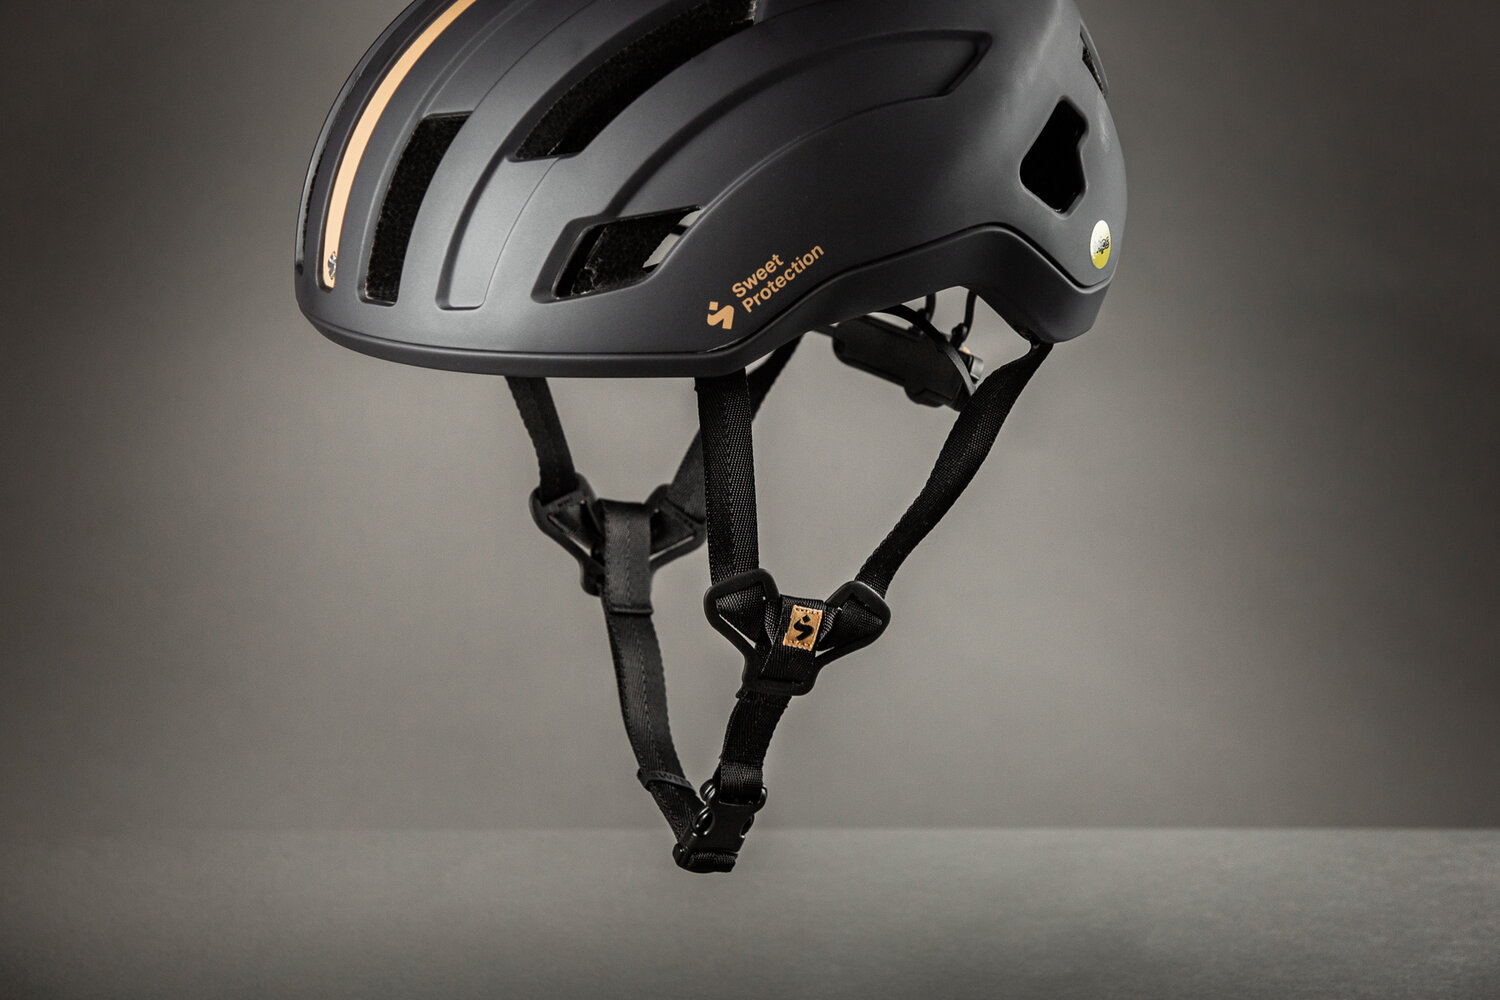 Sweet Protection's new Outrider delivers affordable, everyday road helmet -  Bikerumor